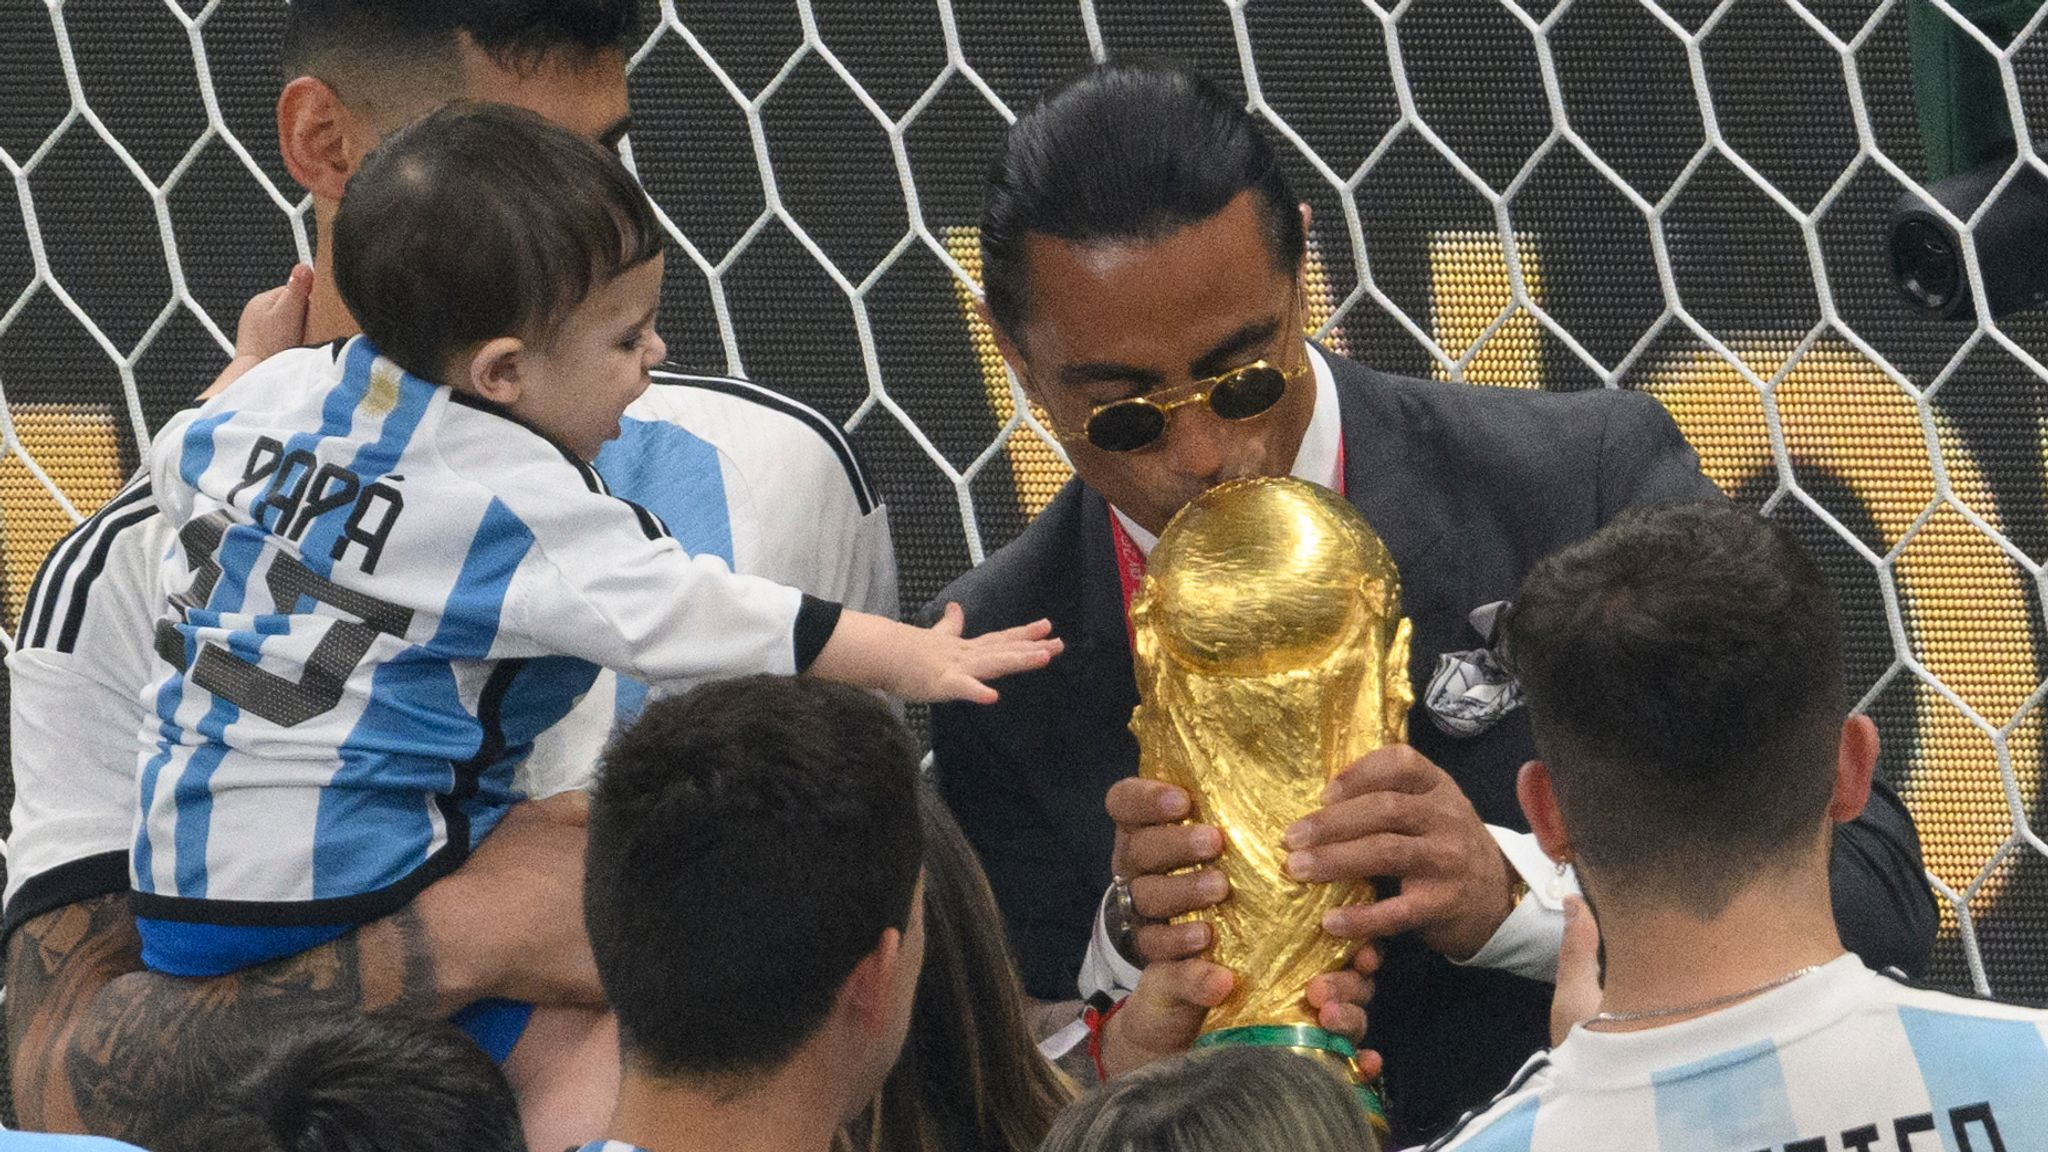 Chef Salt Bae Tells why He Stepped Out On Pitch After 2022 World Cup Final